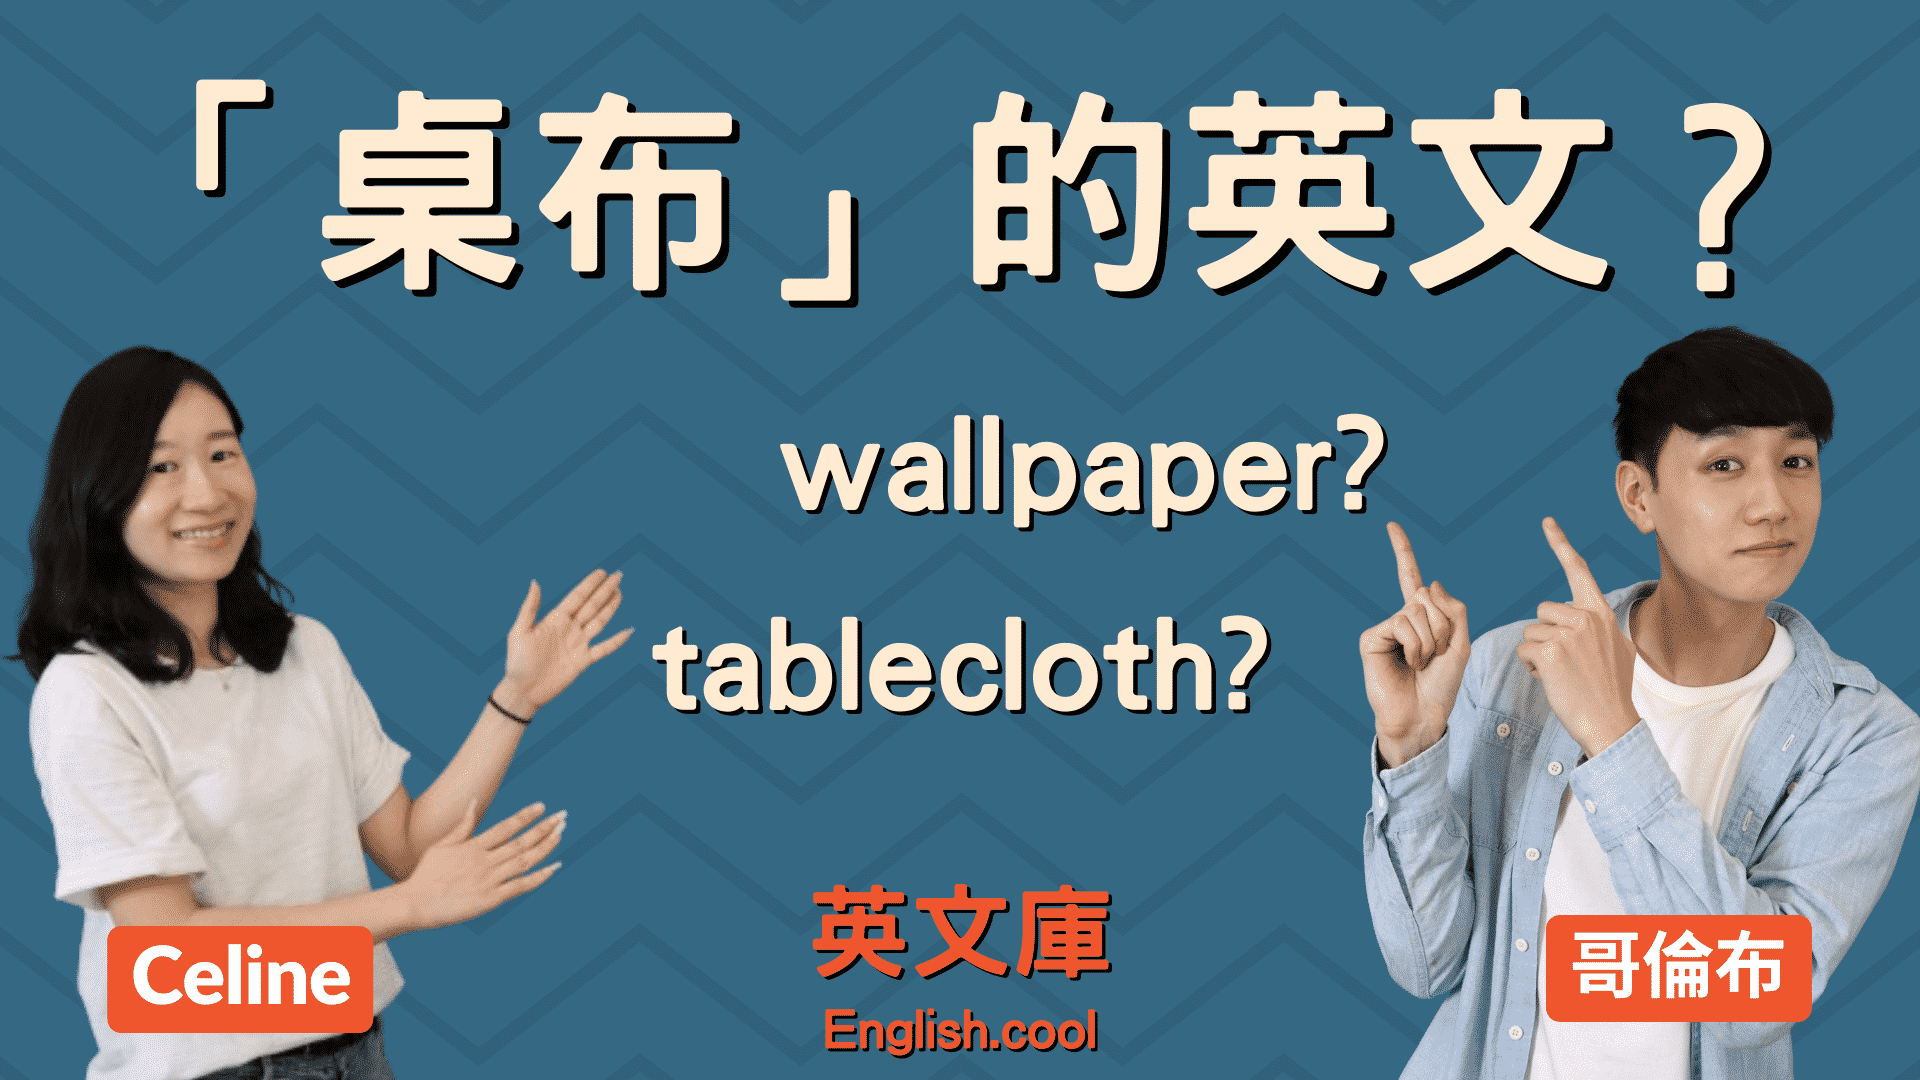 You are currently viewing 「桌布」英文是什麼? wallpaper? tablecloth? 